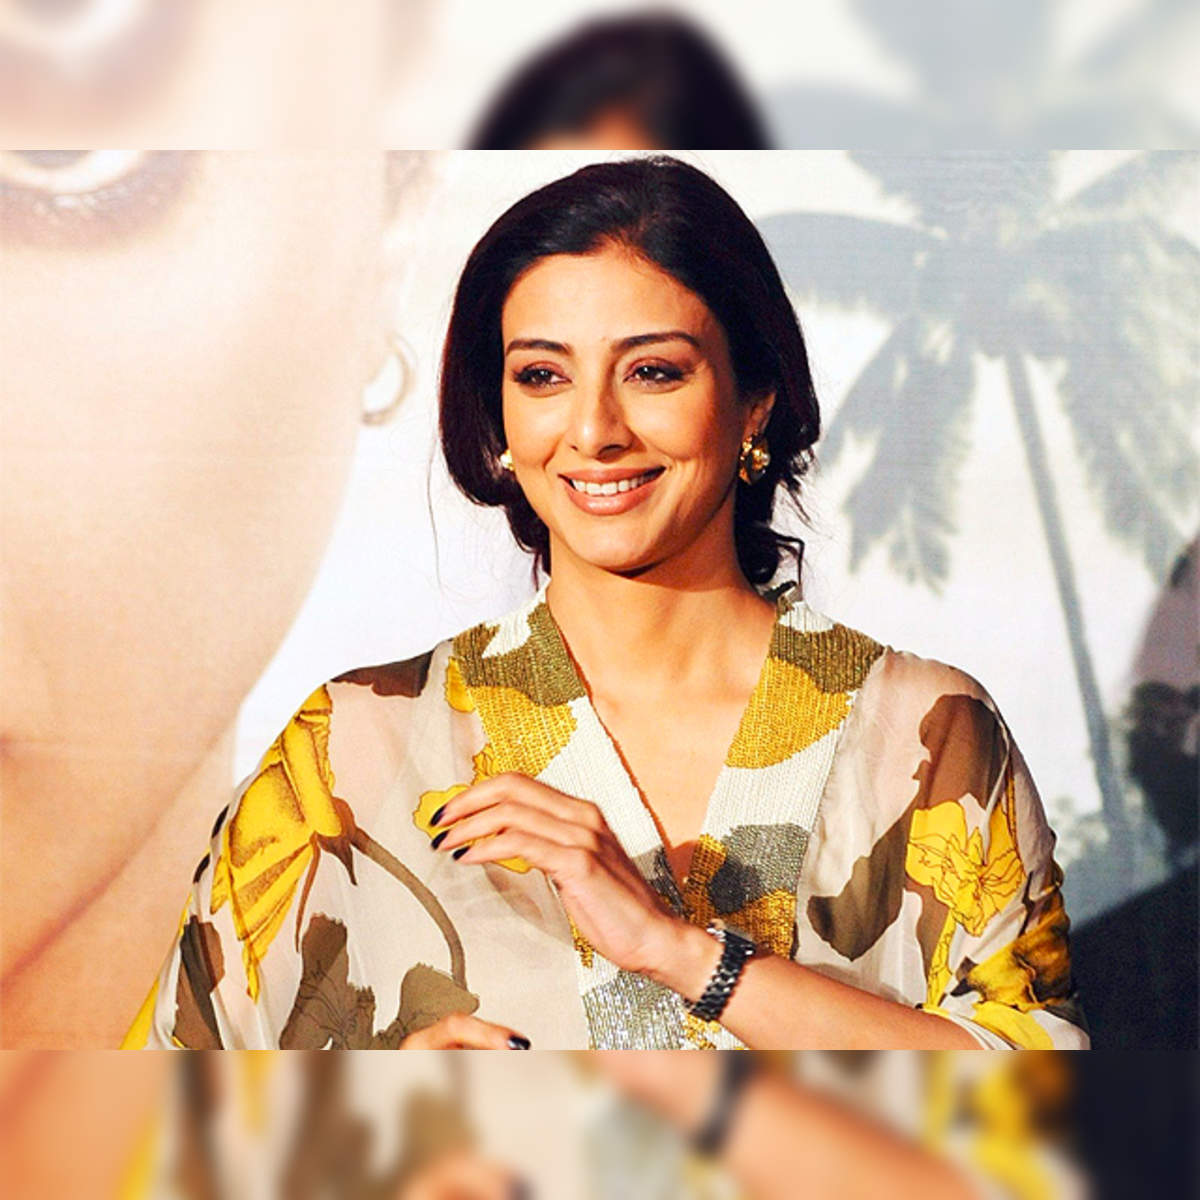 Filmmakers are lazy to cast me in different roles: Tabu - The Economic Times